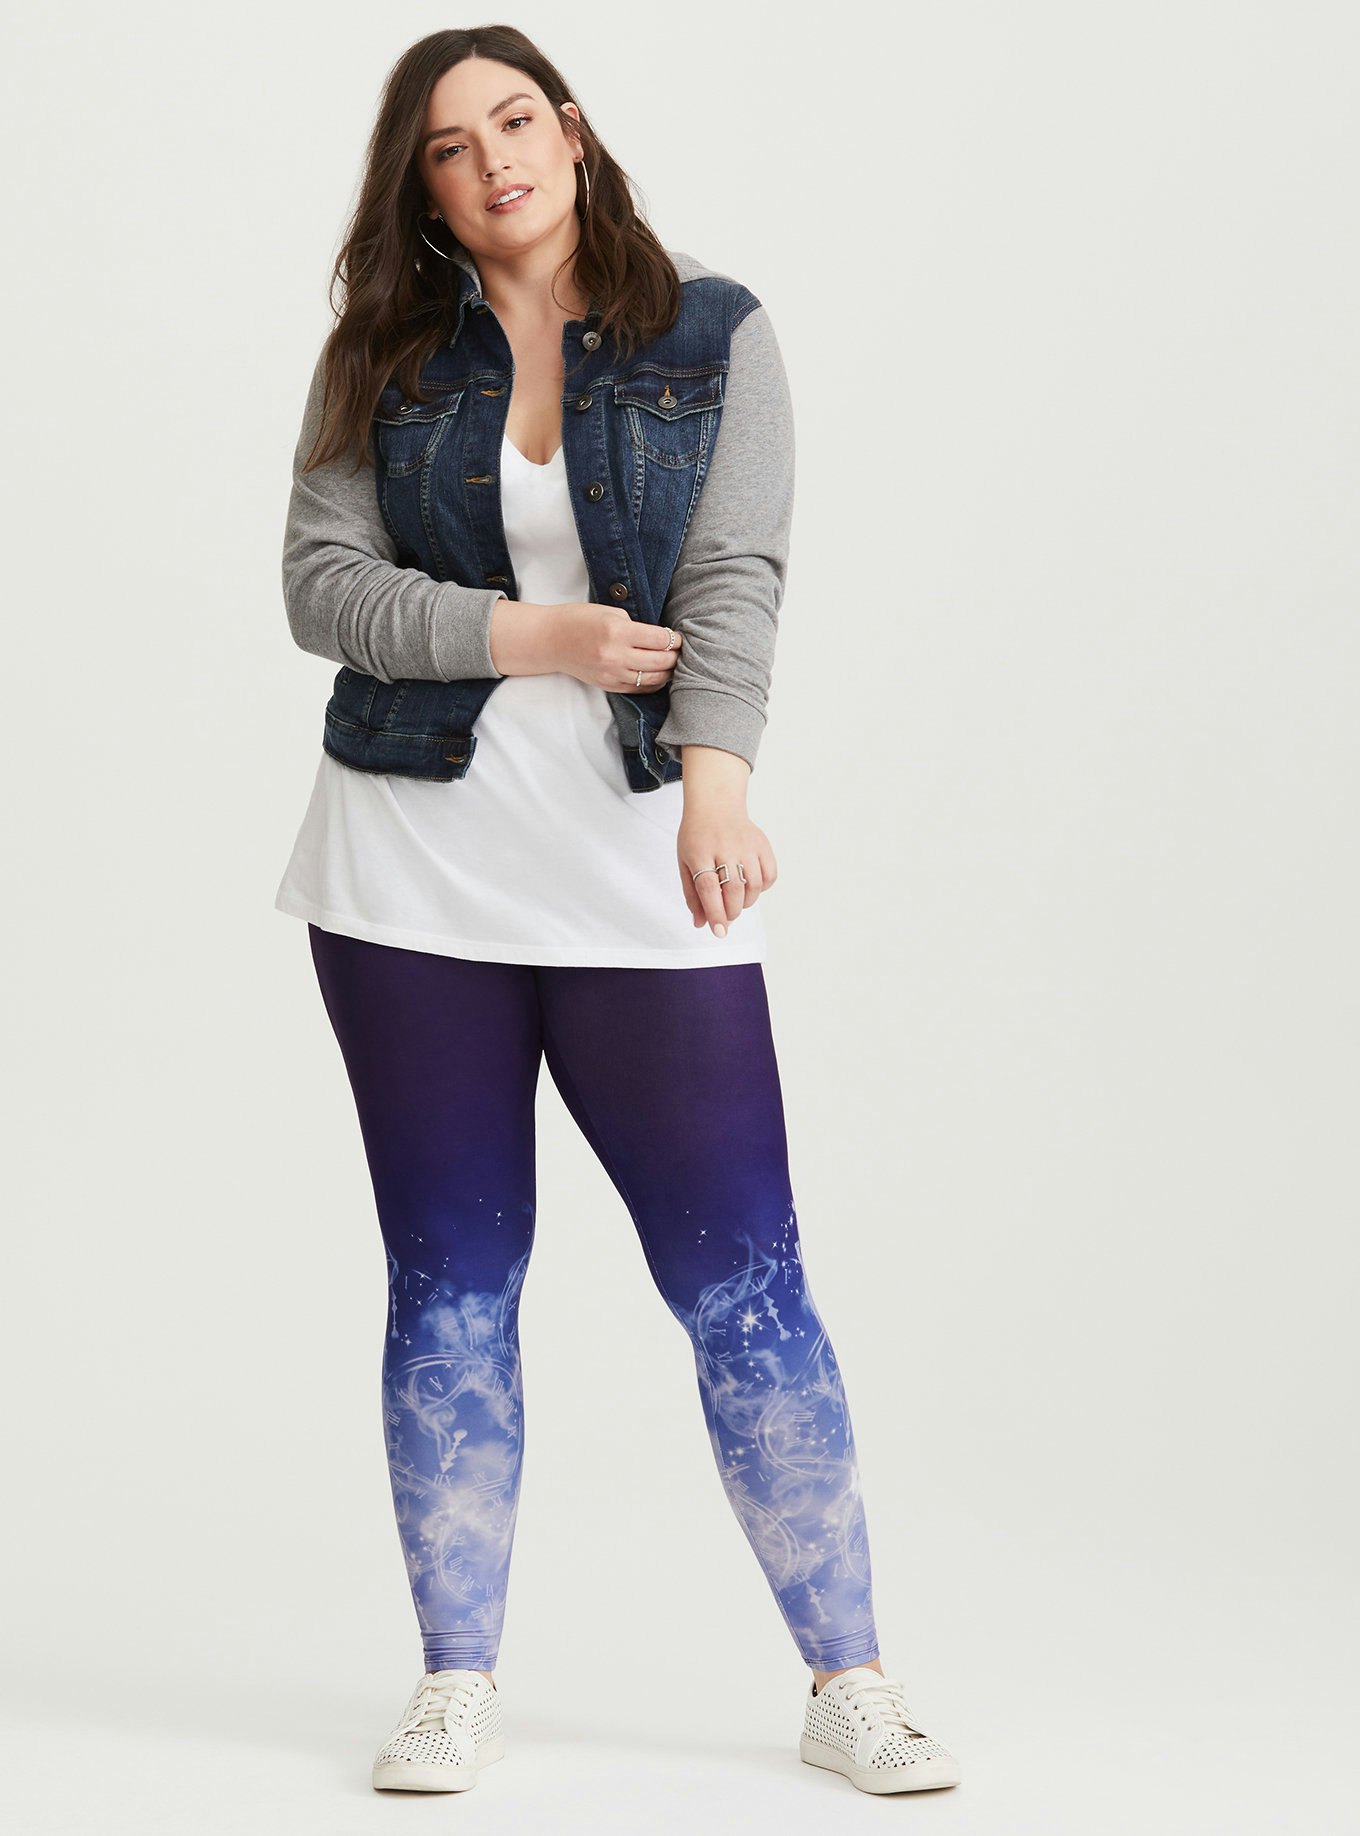 Torrid's Cinderella Collection Is A Dream Come True — So If The